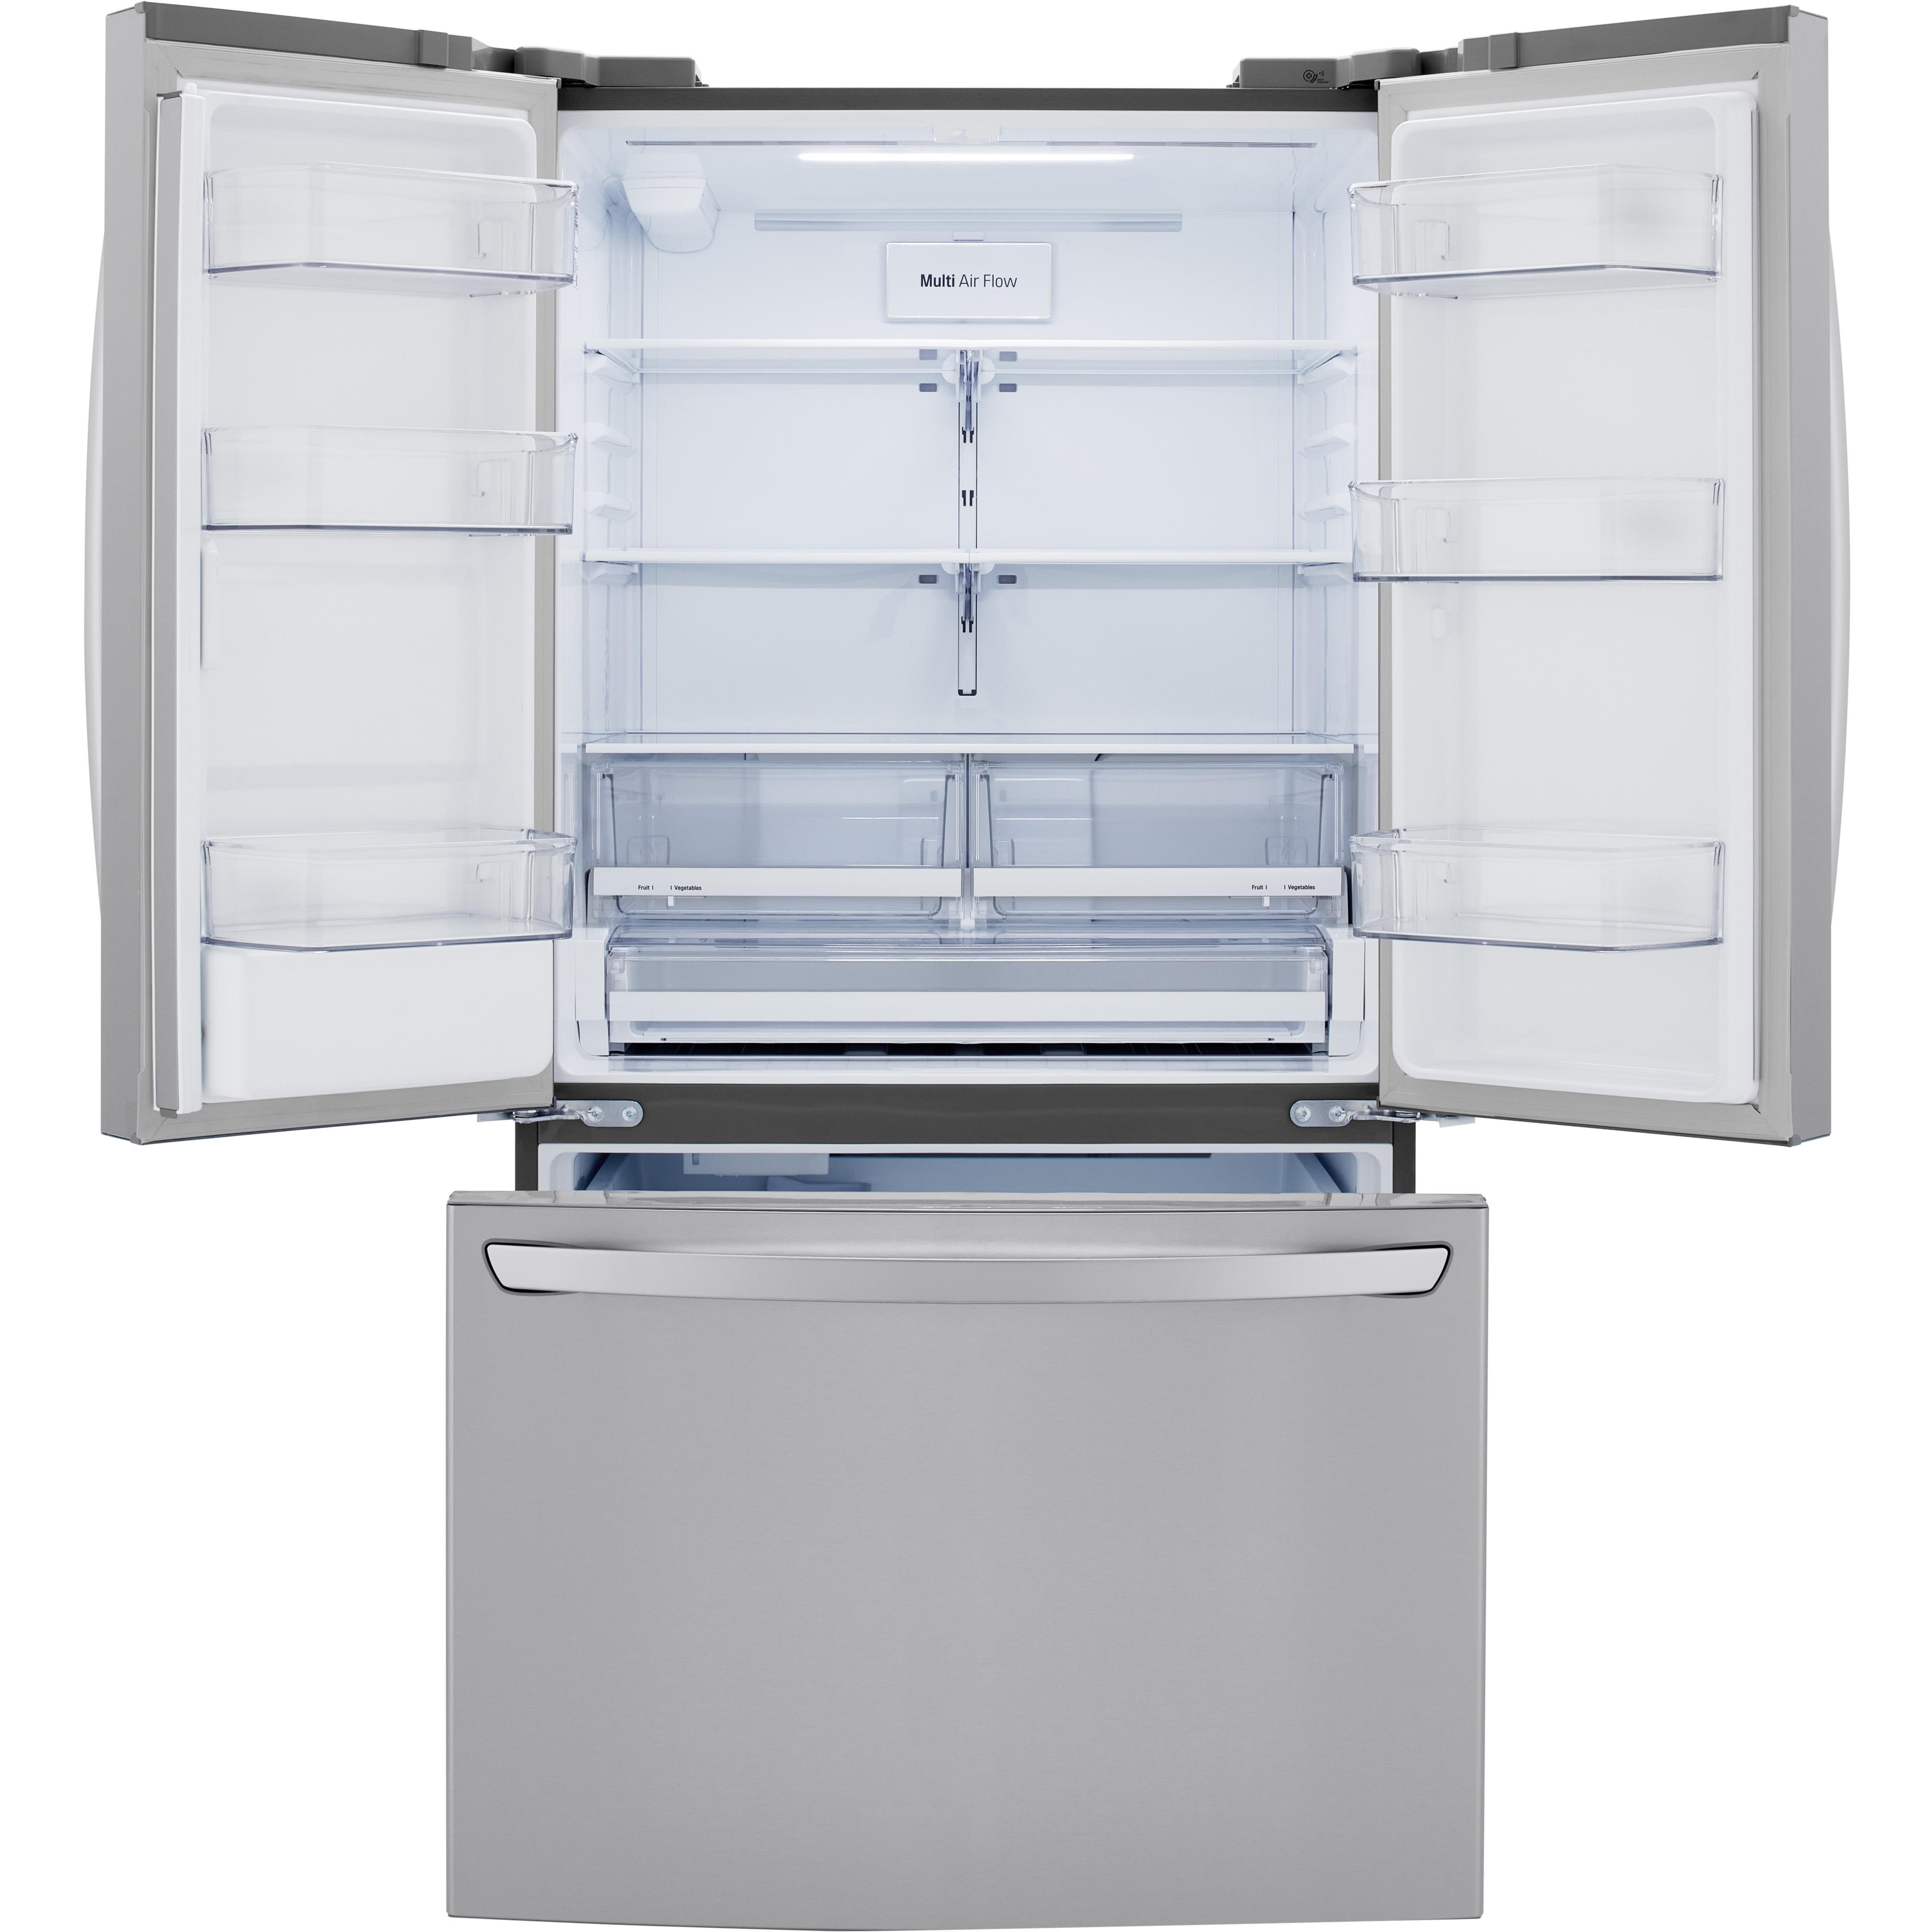 LG 36-inch, 29 cu.ft. Freestanding French 3-Door Refrigerator with Multi-Air Flow? Technology LRFWS2906S